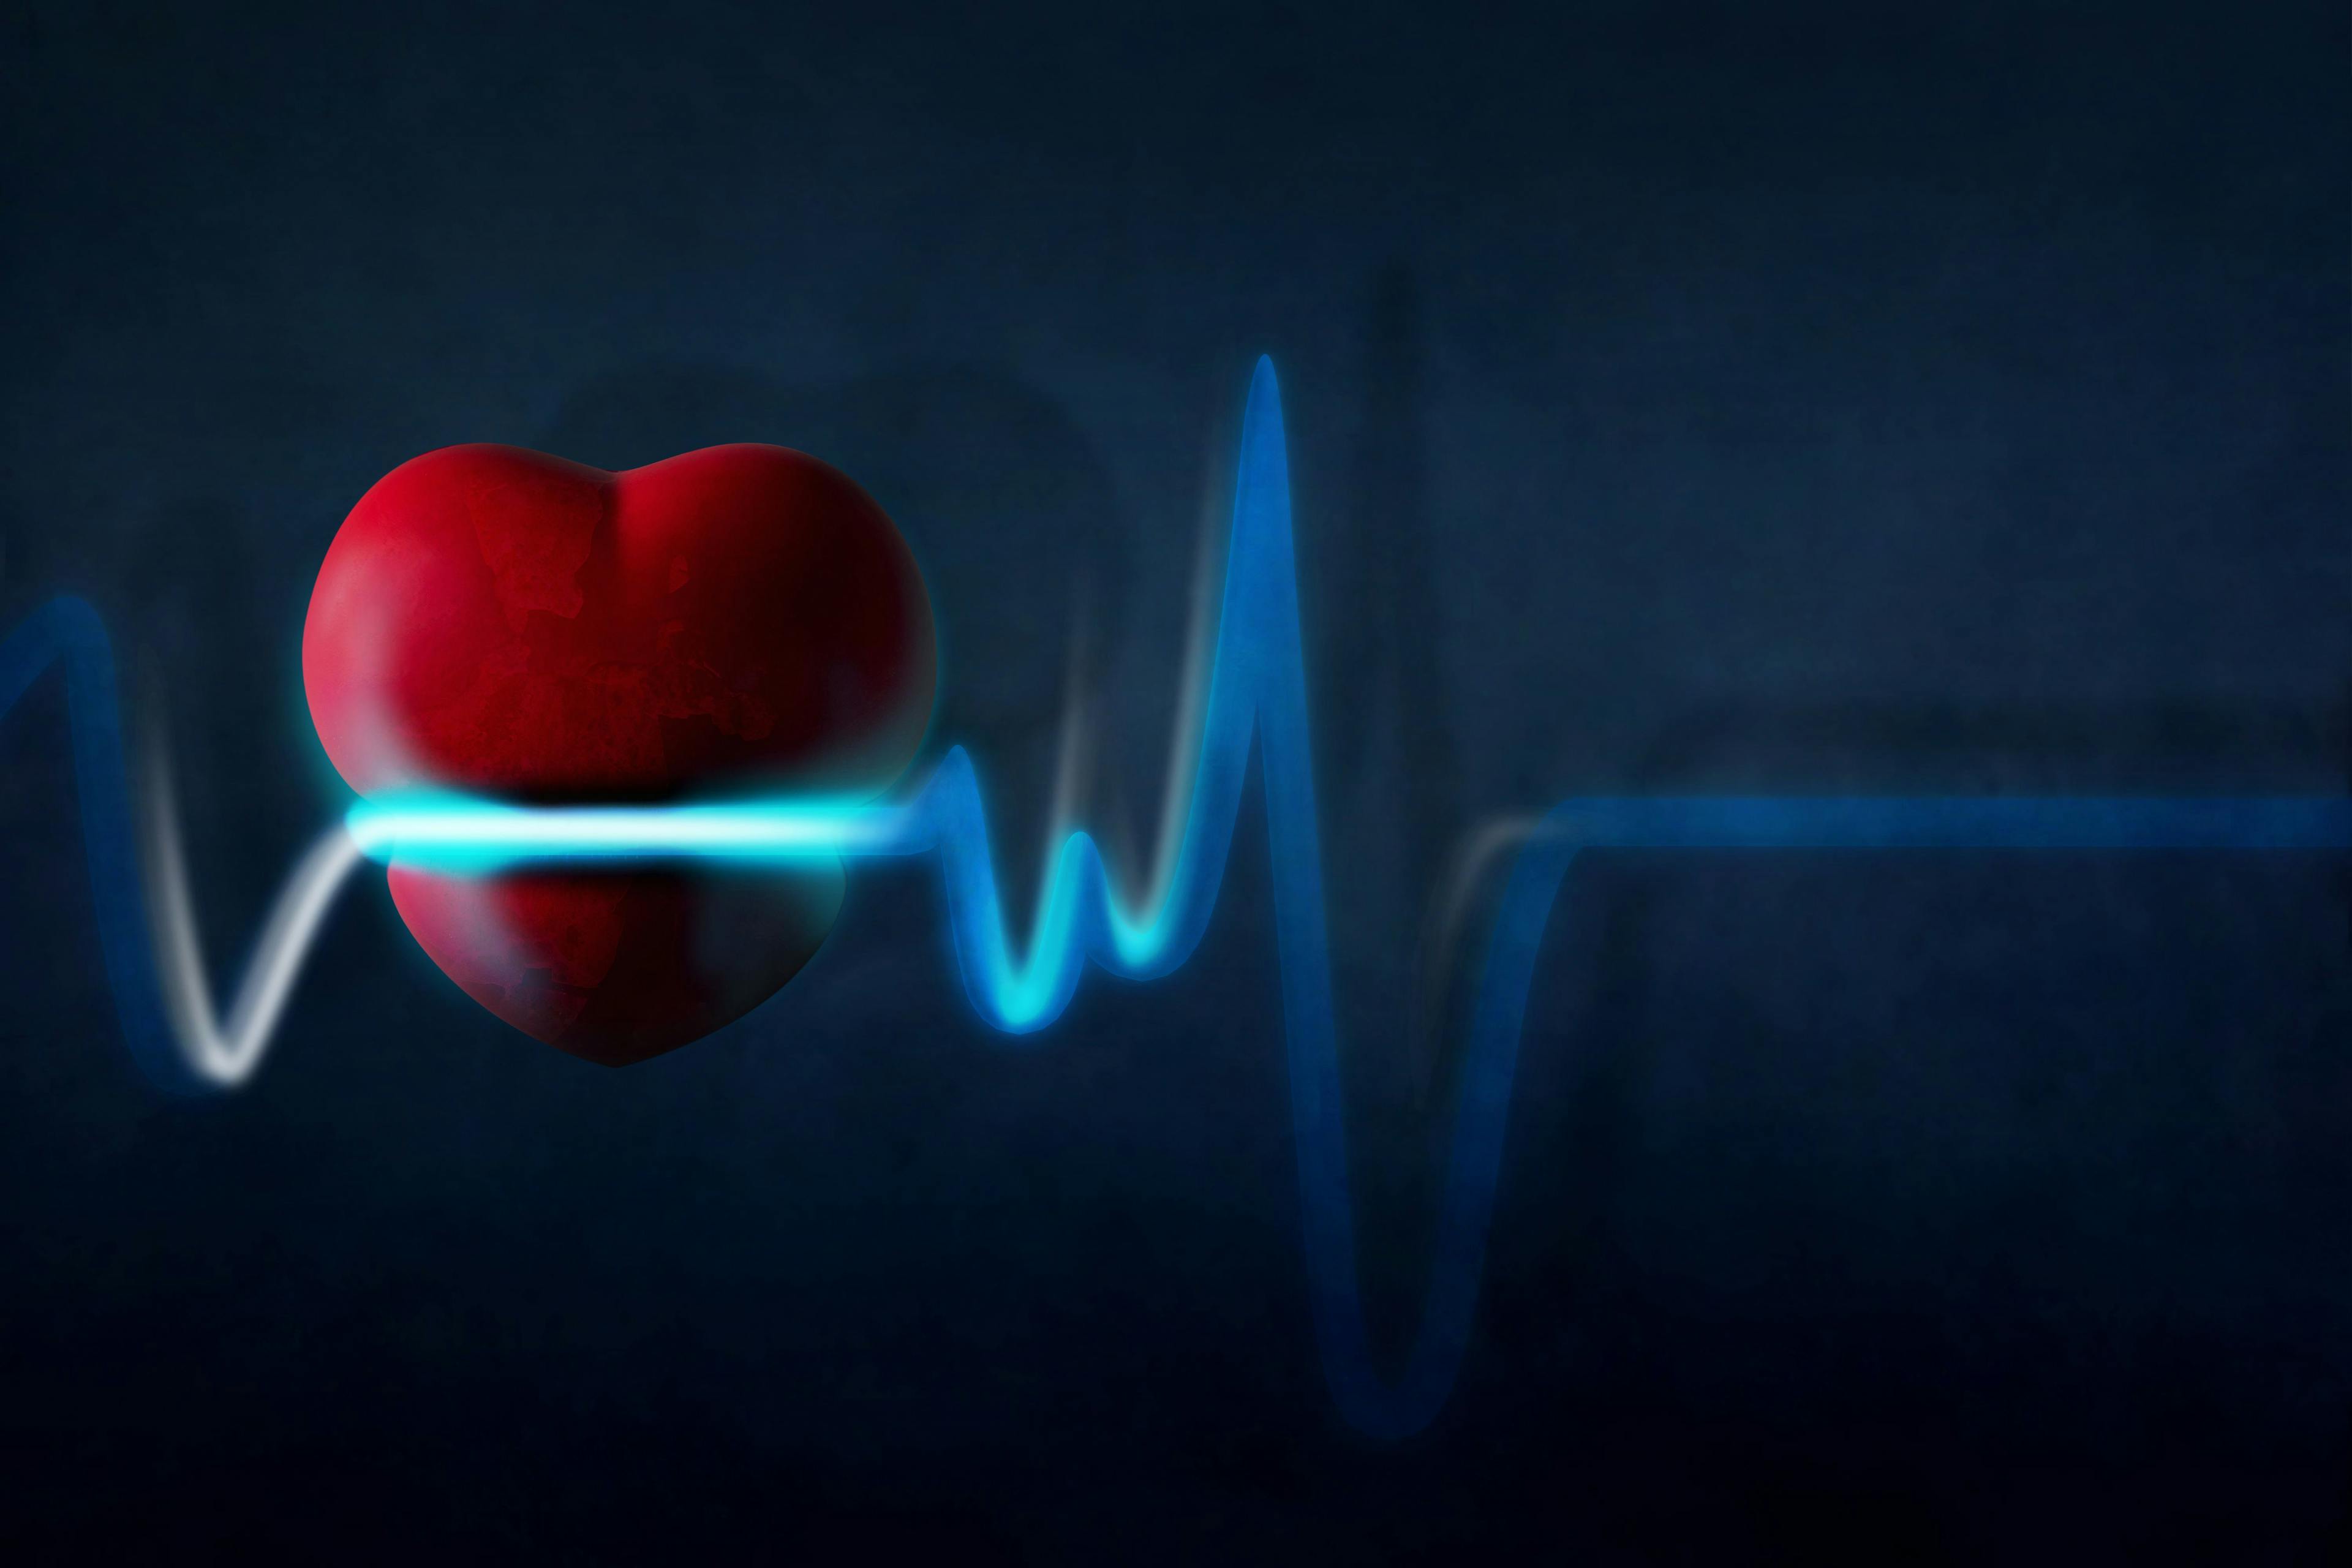 Heart Pain or Attack Concept, Healthcare and Problem present by Stressed Grunge Heart and Rate Beat | Image Credit: blacksalmon - stock.adobe.com